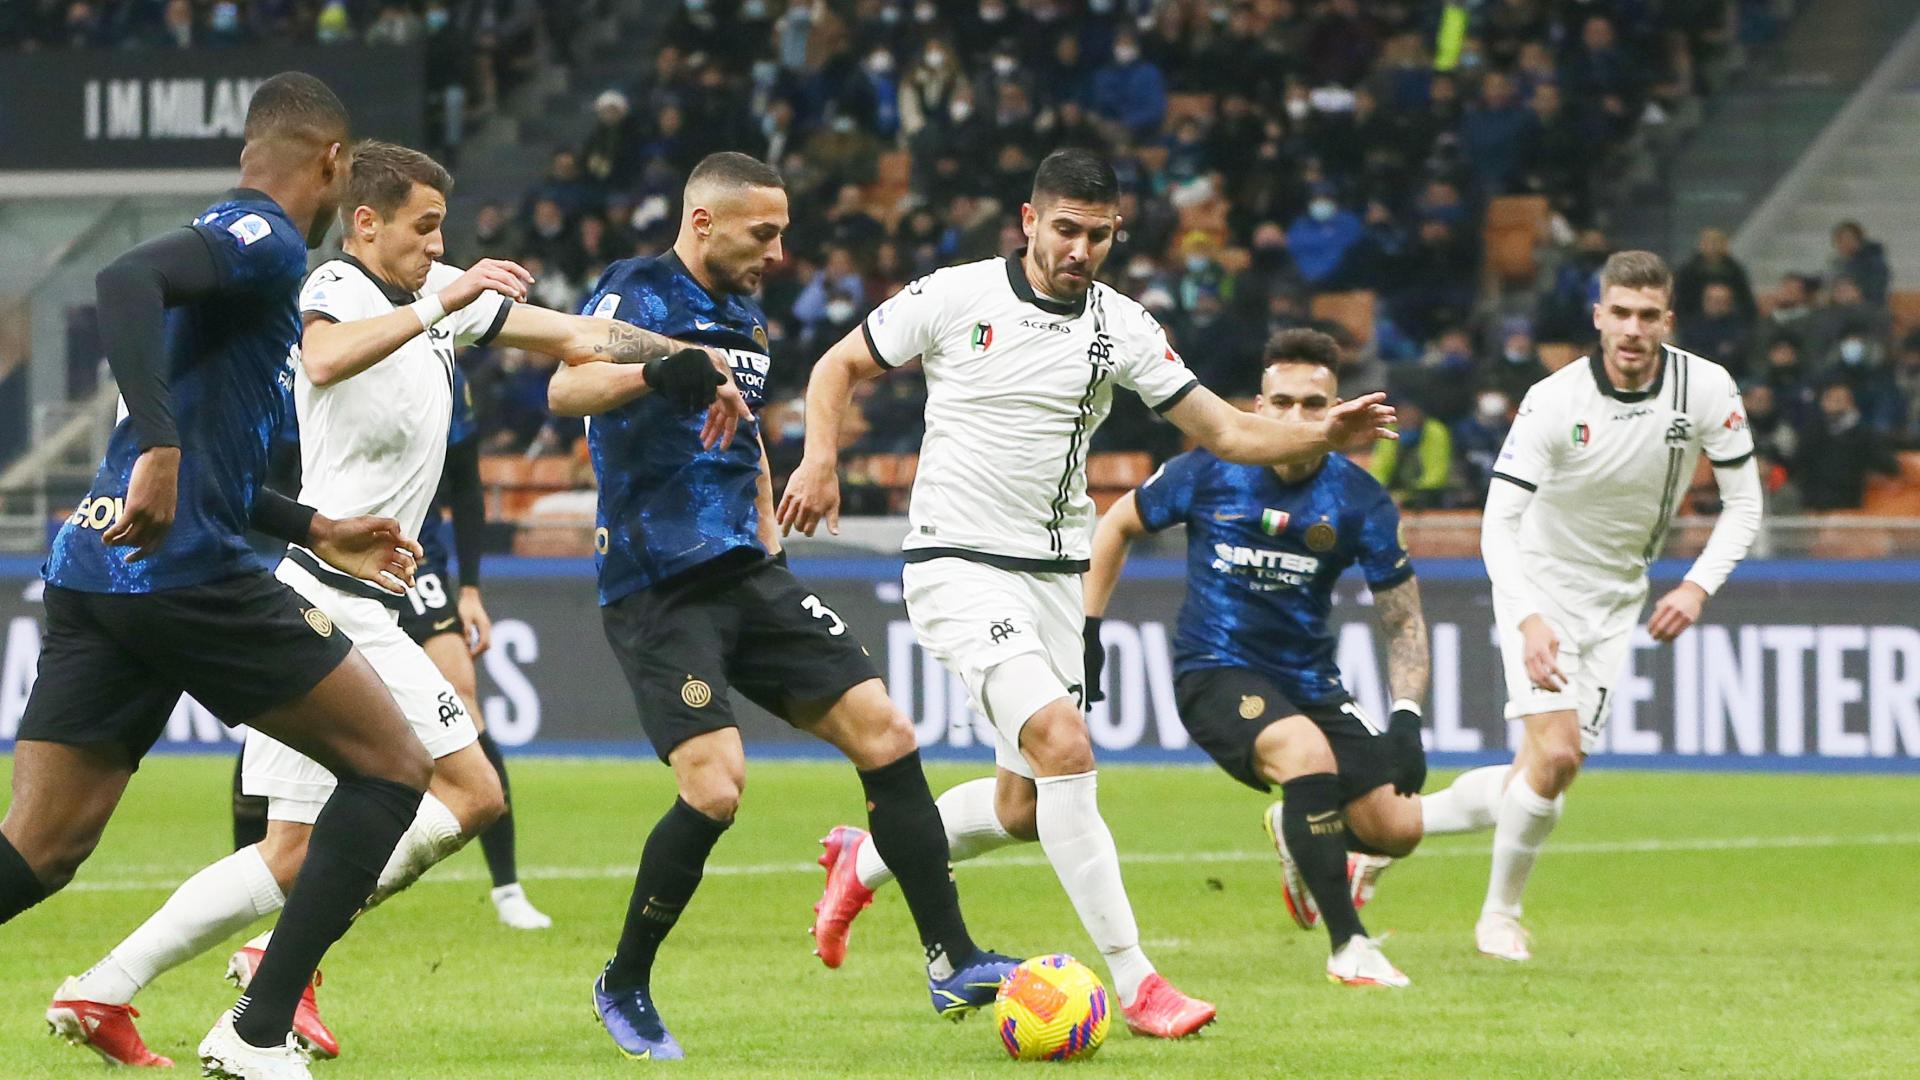 INTER-SPEZIA 2-0: The highlights